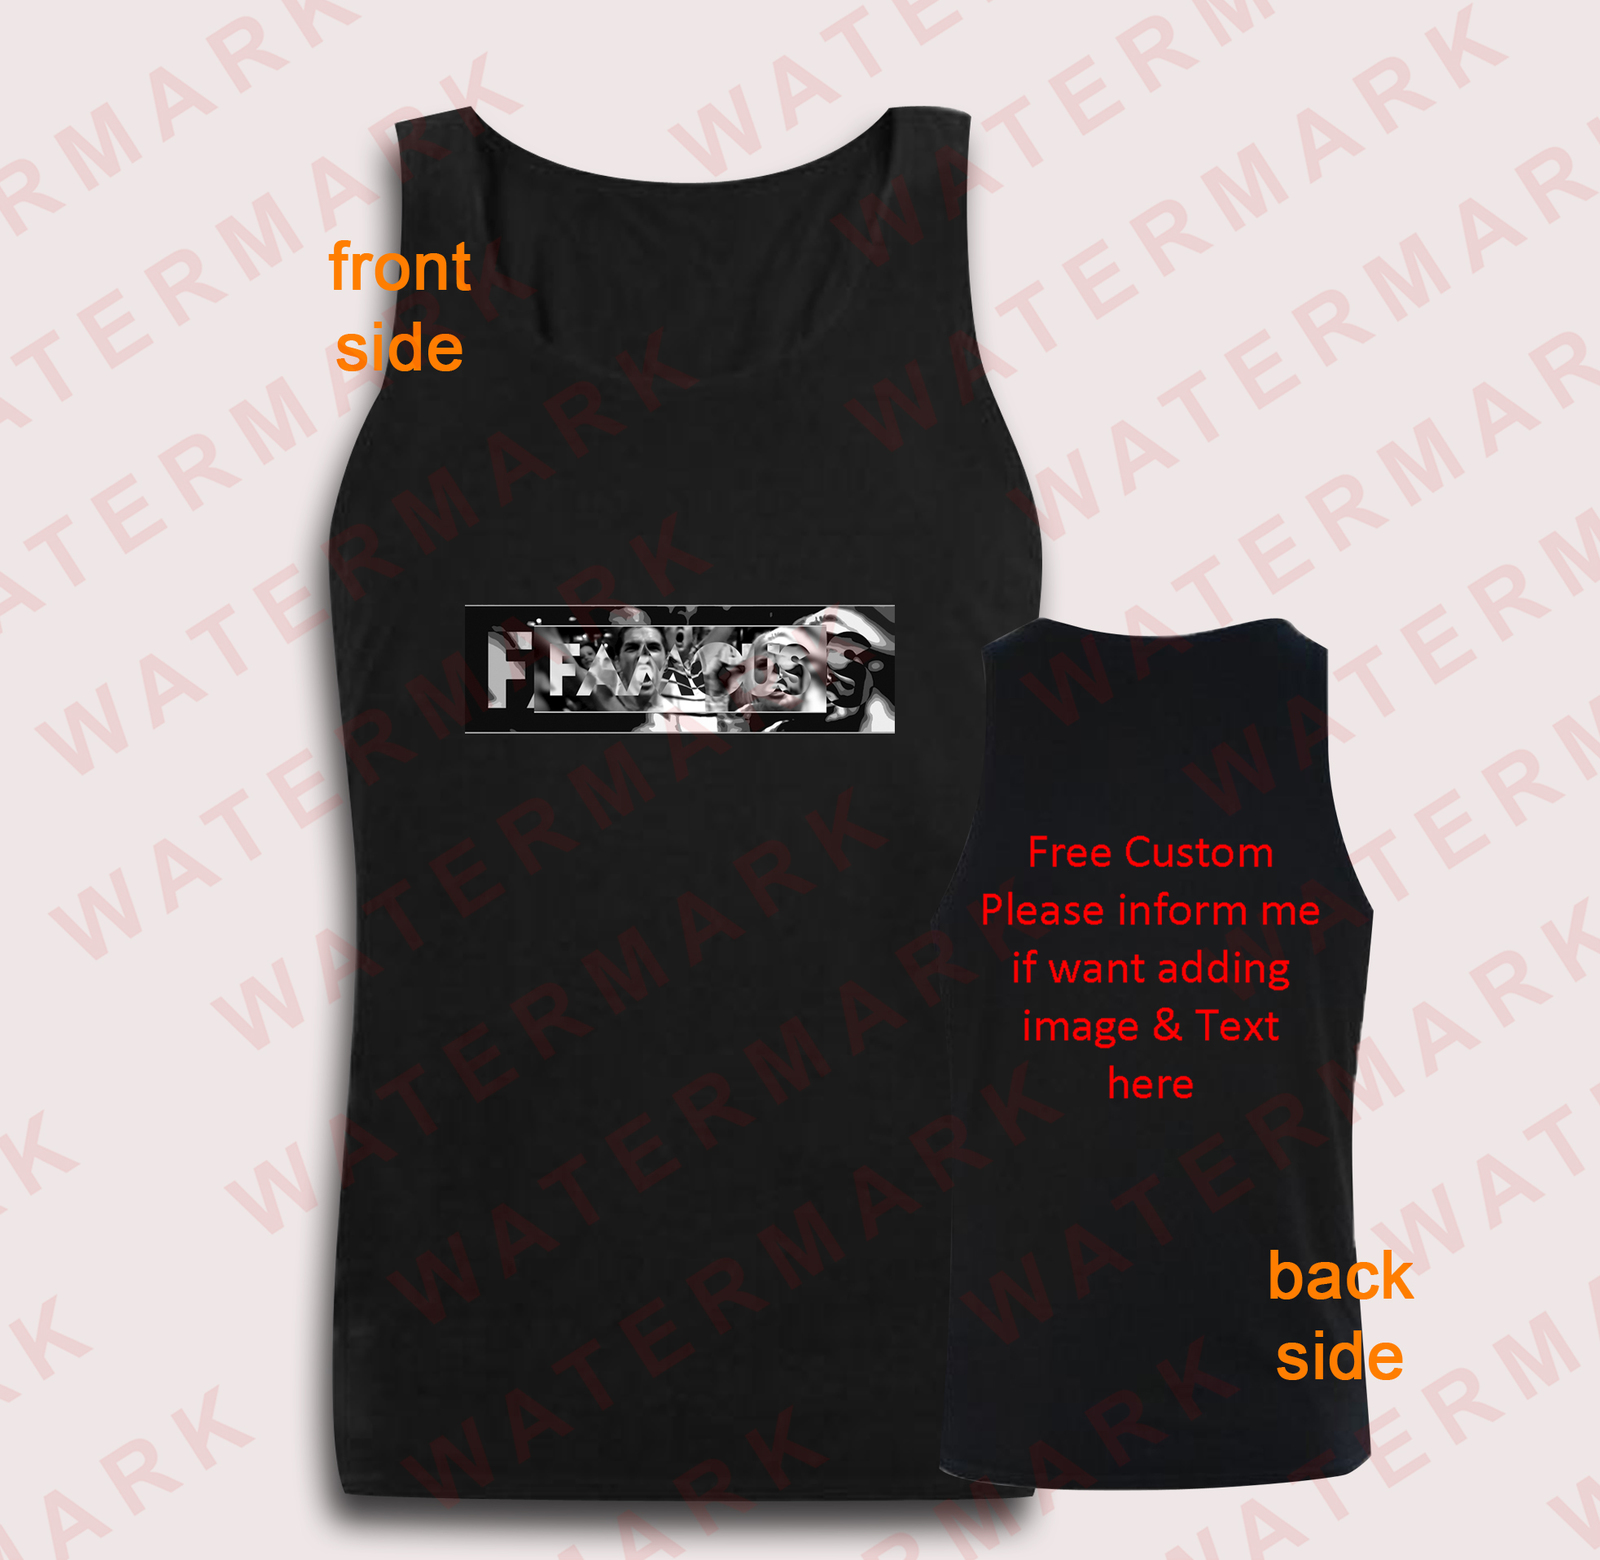 Primary image for 7 FAMOUS - KERSER tank top